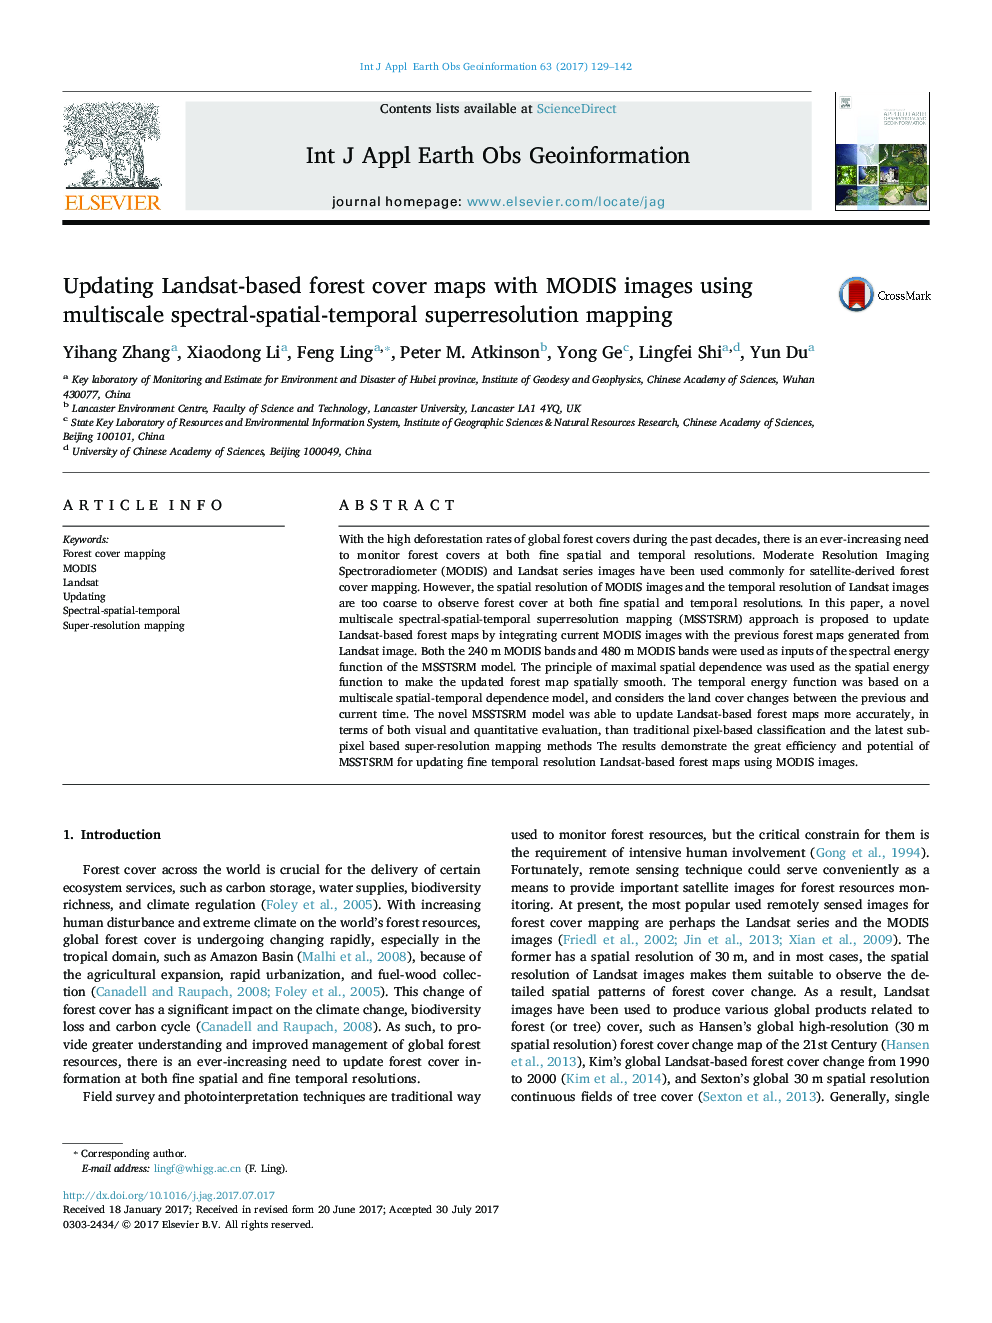 Updating Landsat-based forest cover maps with MODIS images using multiscale spectral-spatial-temporal superresolution mapping